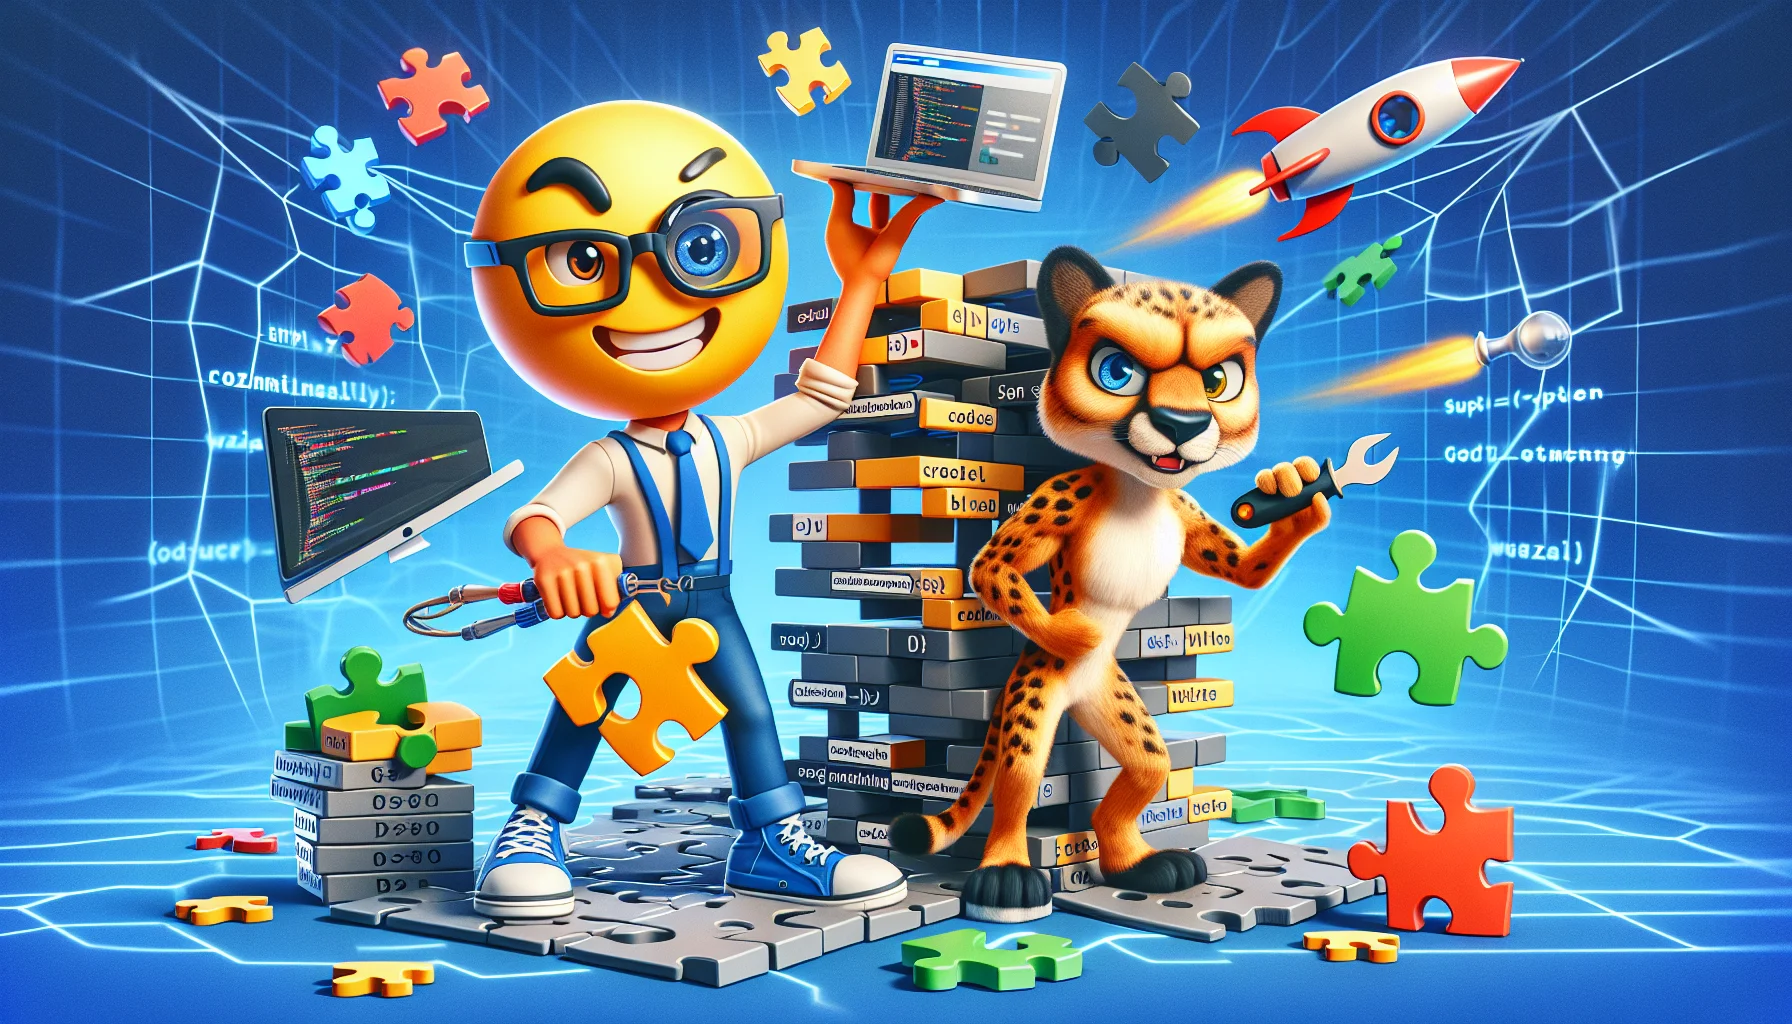 Generate a humorous image of a typical website building scenario. Picture a human personified as 'Best Affiliate Marketing Website Builder', a character with glasses, a nerdy demeanor, and tools in hand such as a oversized screwdriver and code brackets. This character has a emoji face with a wink, symbolizing its cunning. Beside it stands the 'Web Hosting', depicted as a super-fast cheetah with a rocket pack on its back, symbolizing the high-speed and efficiency. Both characters are engaged in a playful but professional setting, amidst a backdrop of abstract internet cyberspace. They are arranging giant, 3D puzzle pieces into a website shape, showing the ease of building a website.